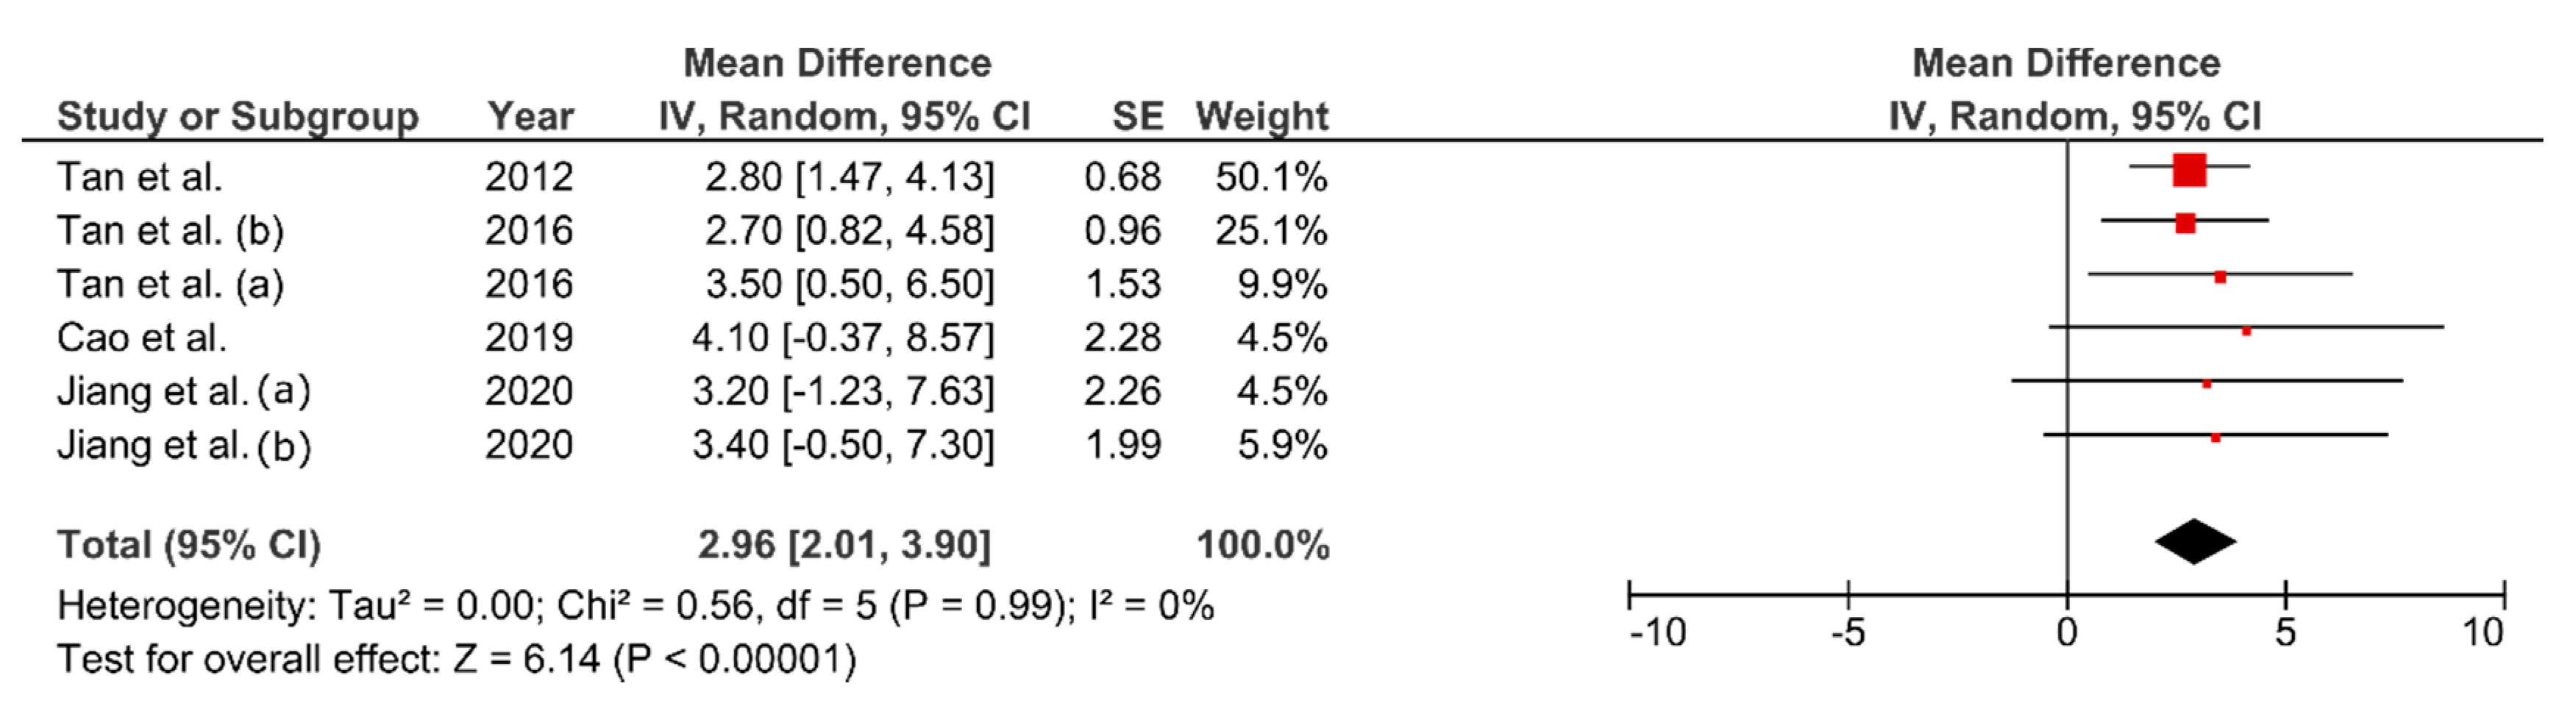 Ijerph Free Full Text Chronic Effect Of Fatmax Training On Body Weight Fat Mass And Cardiorespiratory Fitness In Obese Subjects A Meta Analysis Of Randomized Clinical Trials Html